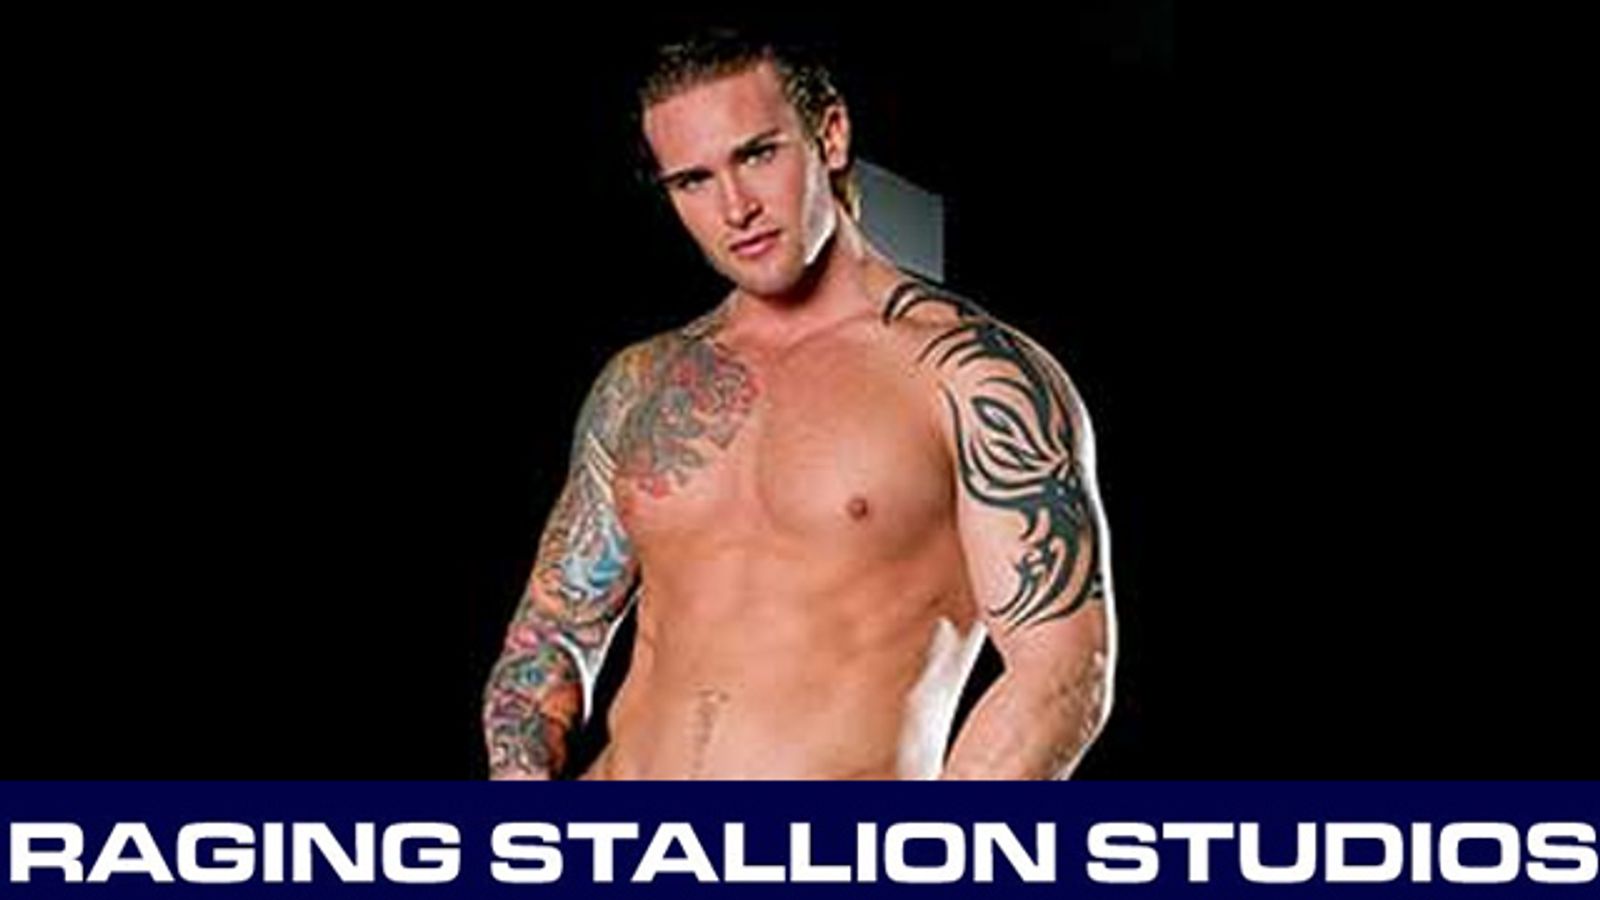 David Taylor Signs Exclusive Contract with Raging Stallion